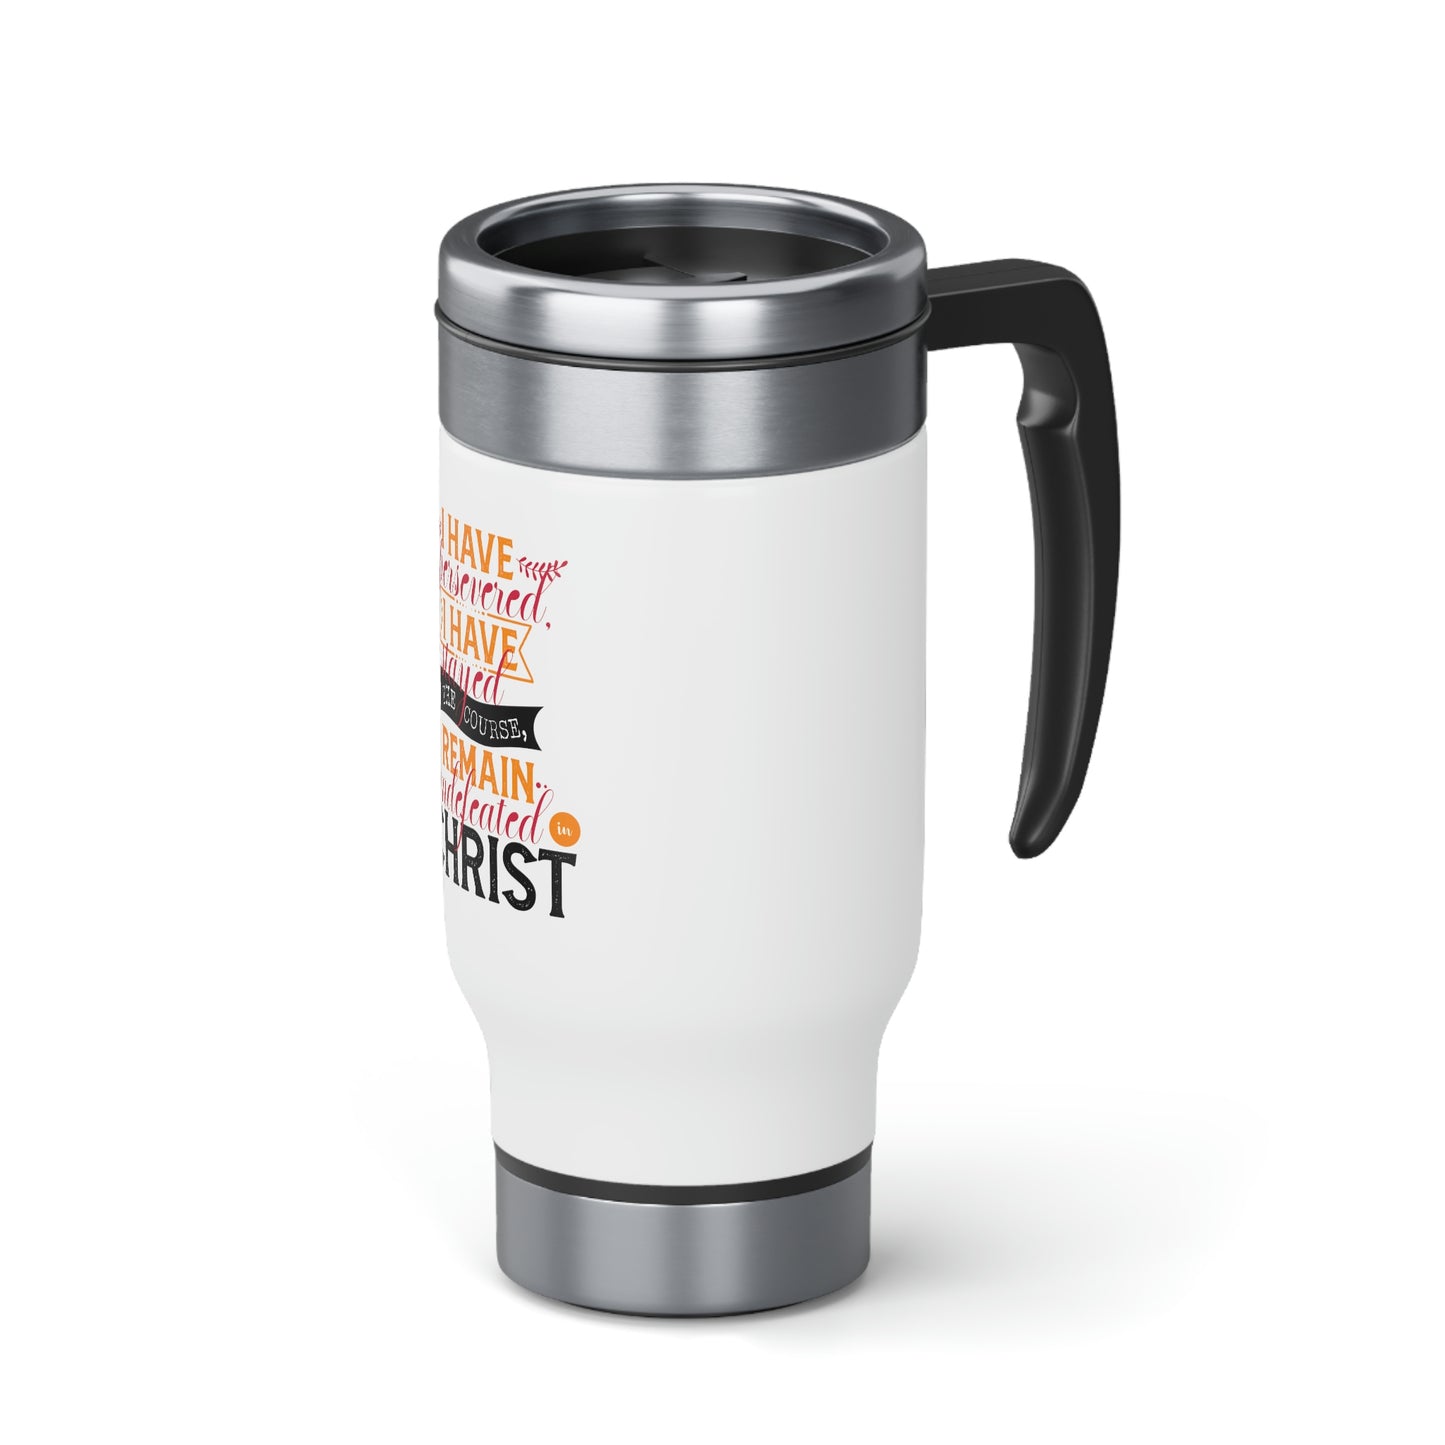 I Have Persevered I Have Stayed The Course I Remain Undefeated In Christ Travel Mug with Handle, 14oz